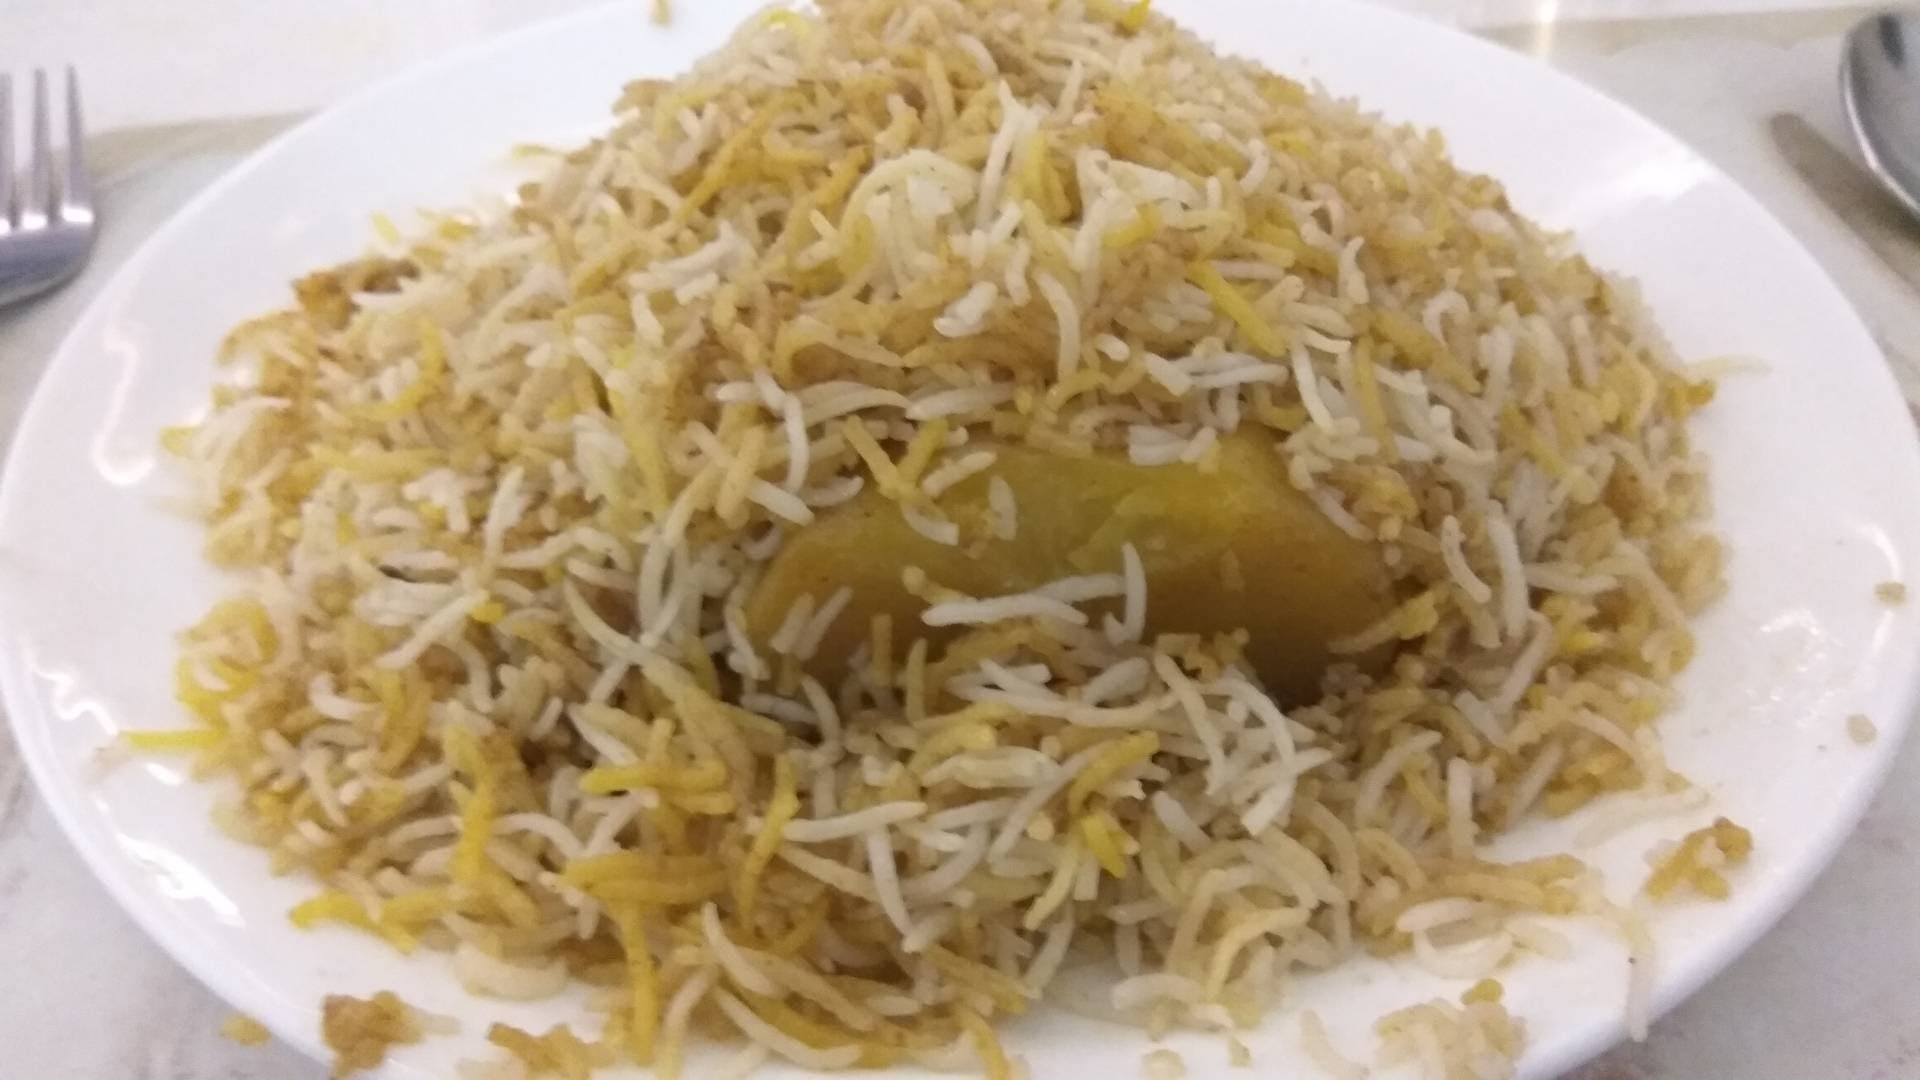 Food,Dish,Ingredient,Cuisine,Produce,Recipe,Indian cuisine,Grated cheese,Basmati,Bean sprouts